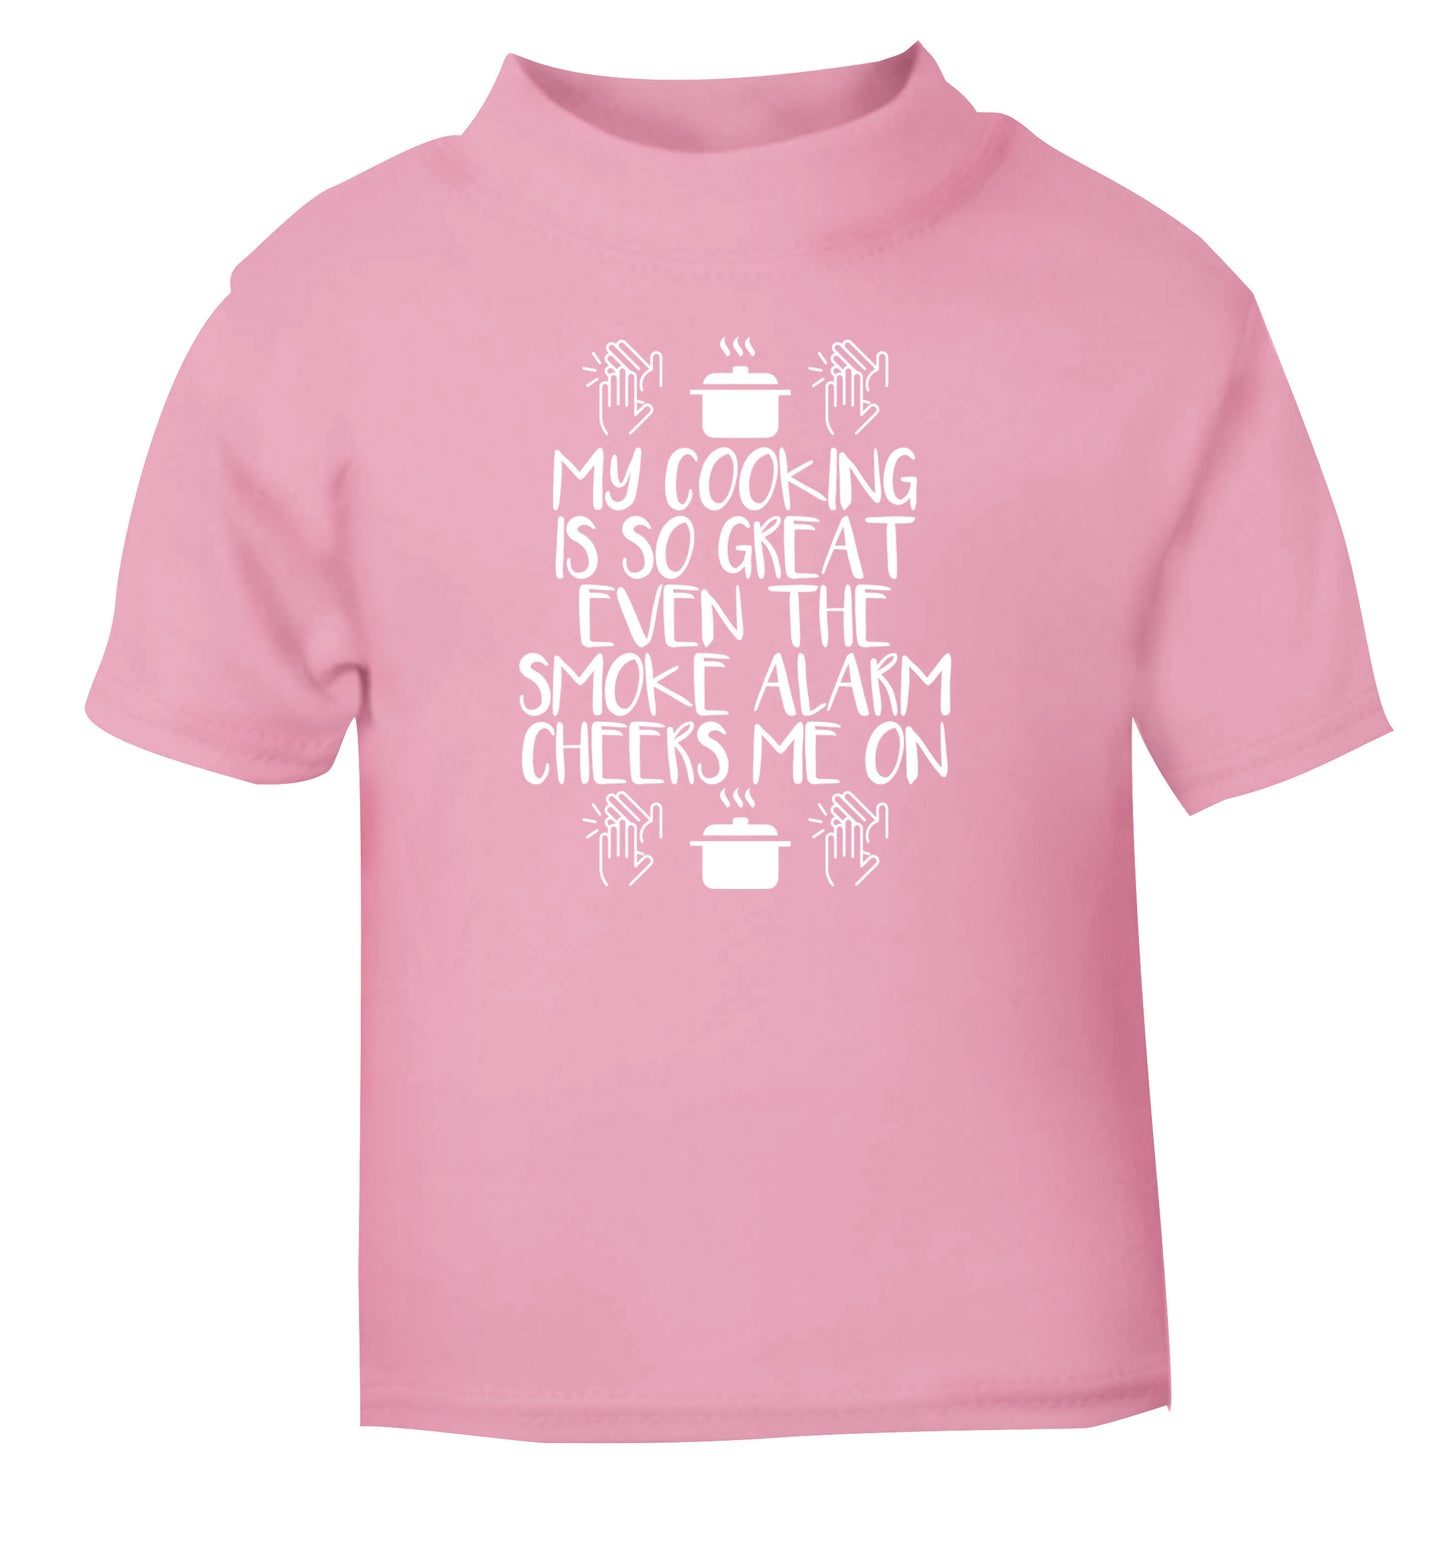 My cooking is so great even the smoke alarm cheers me on! light pink Baby Toddler Tshirt 2 Years